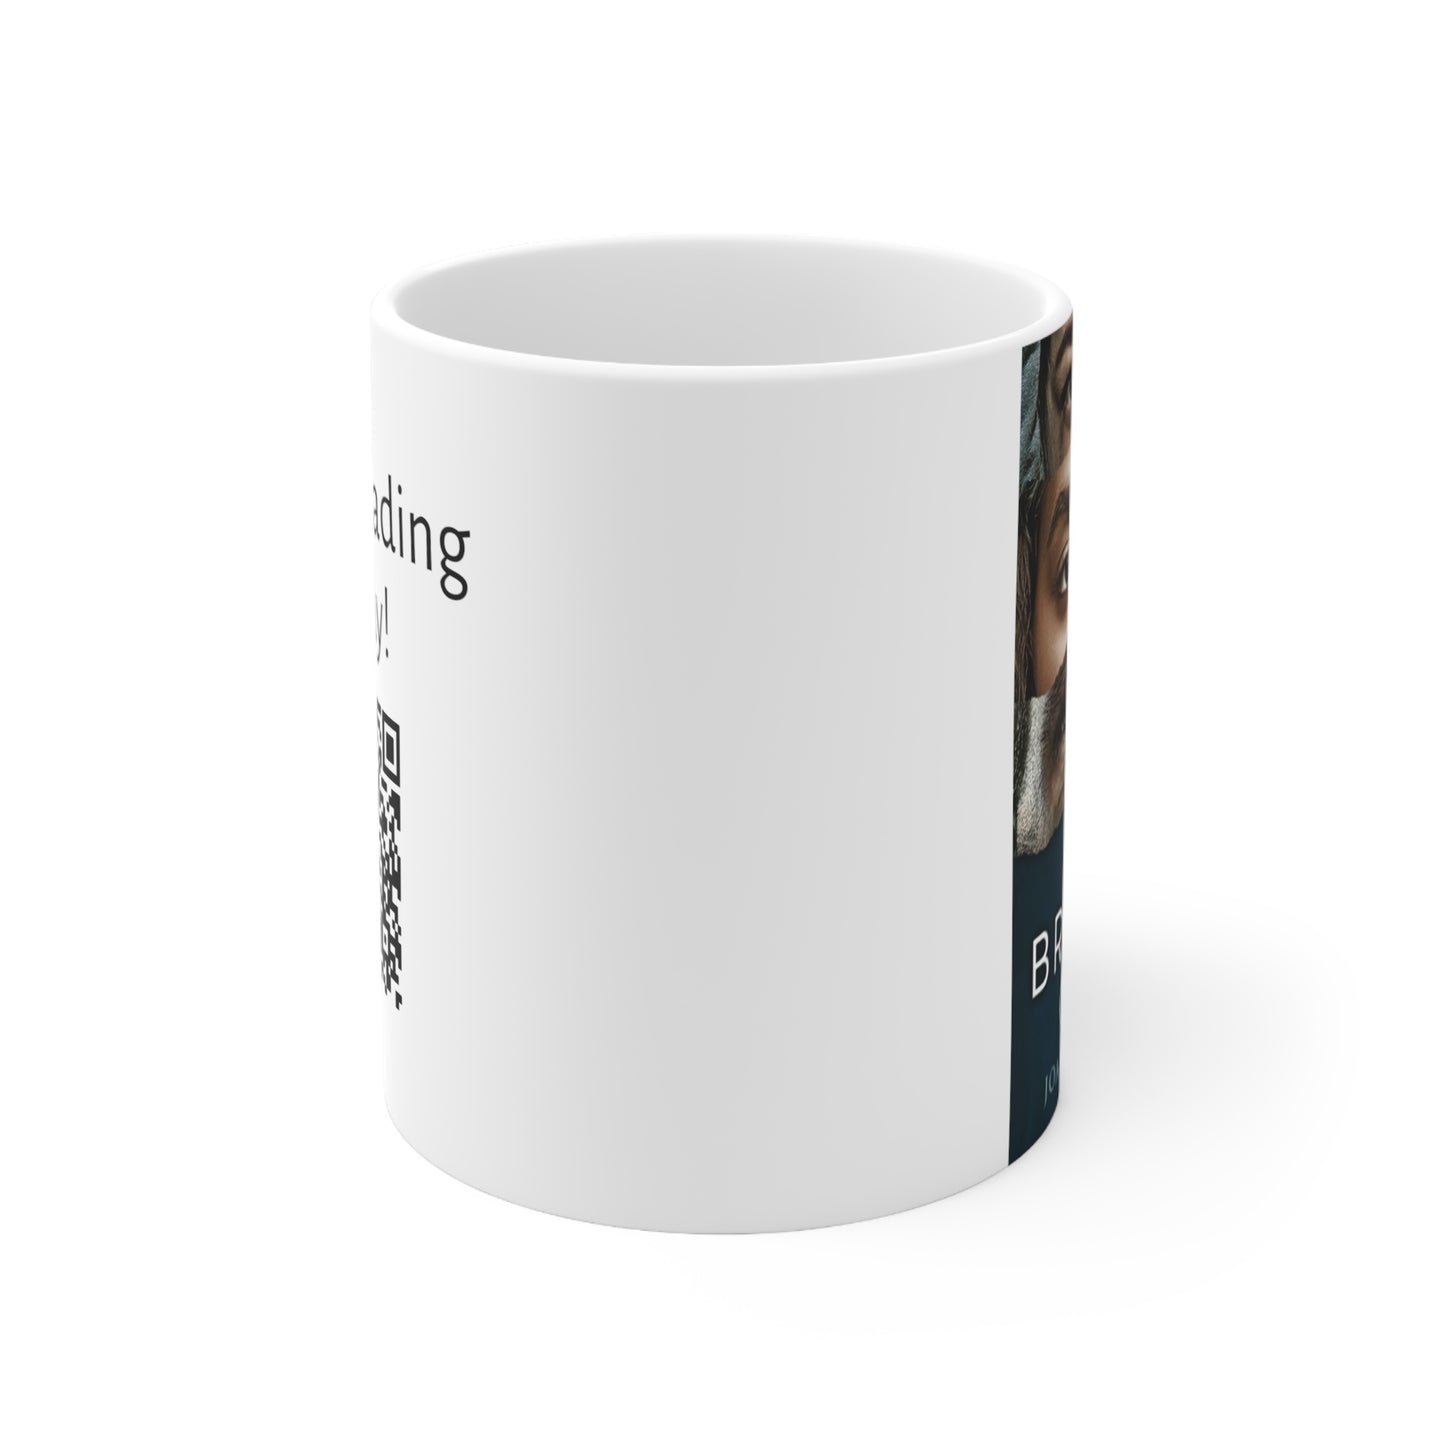 The Branded Ones - Ceramic Coffee Cup